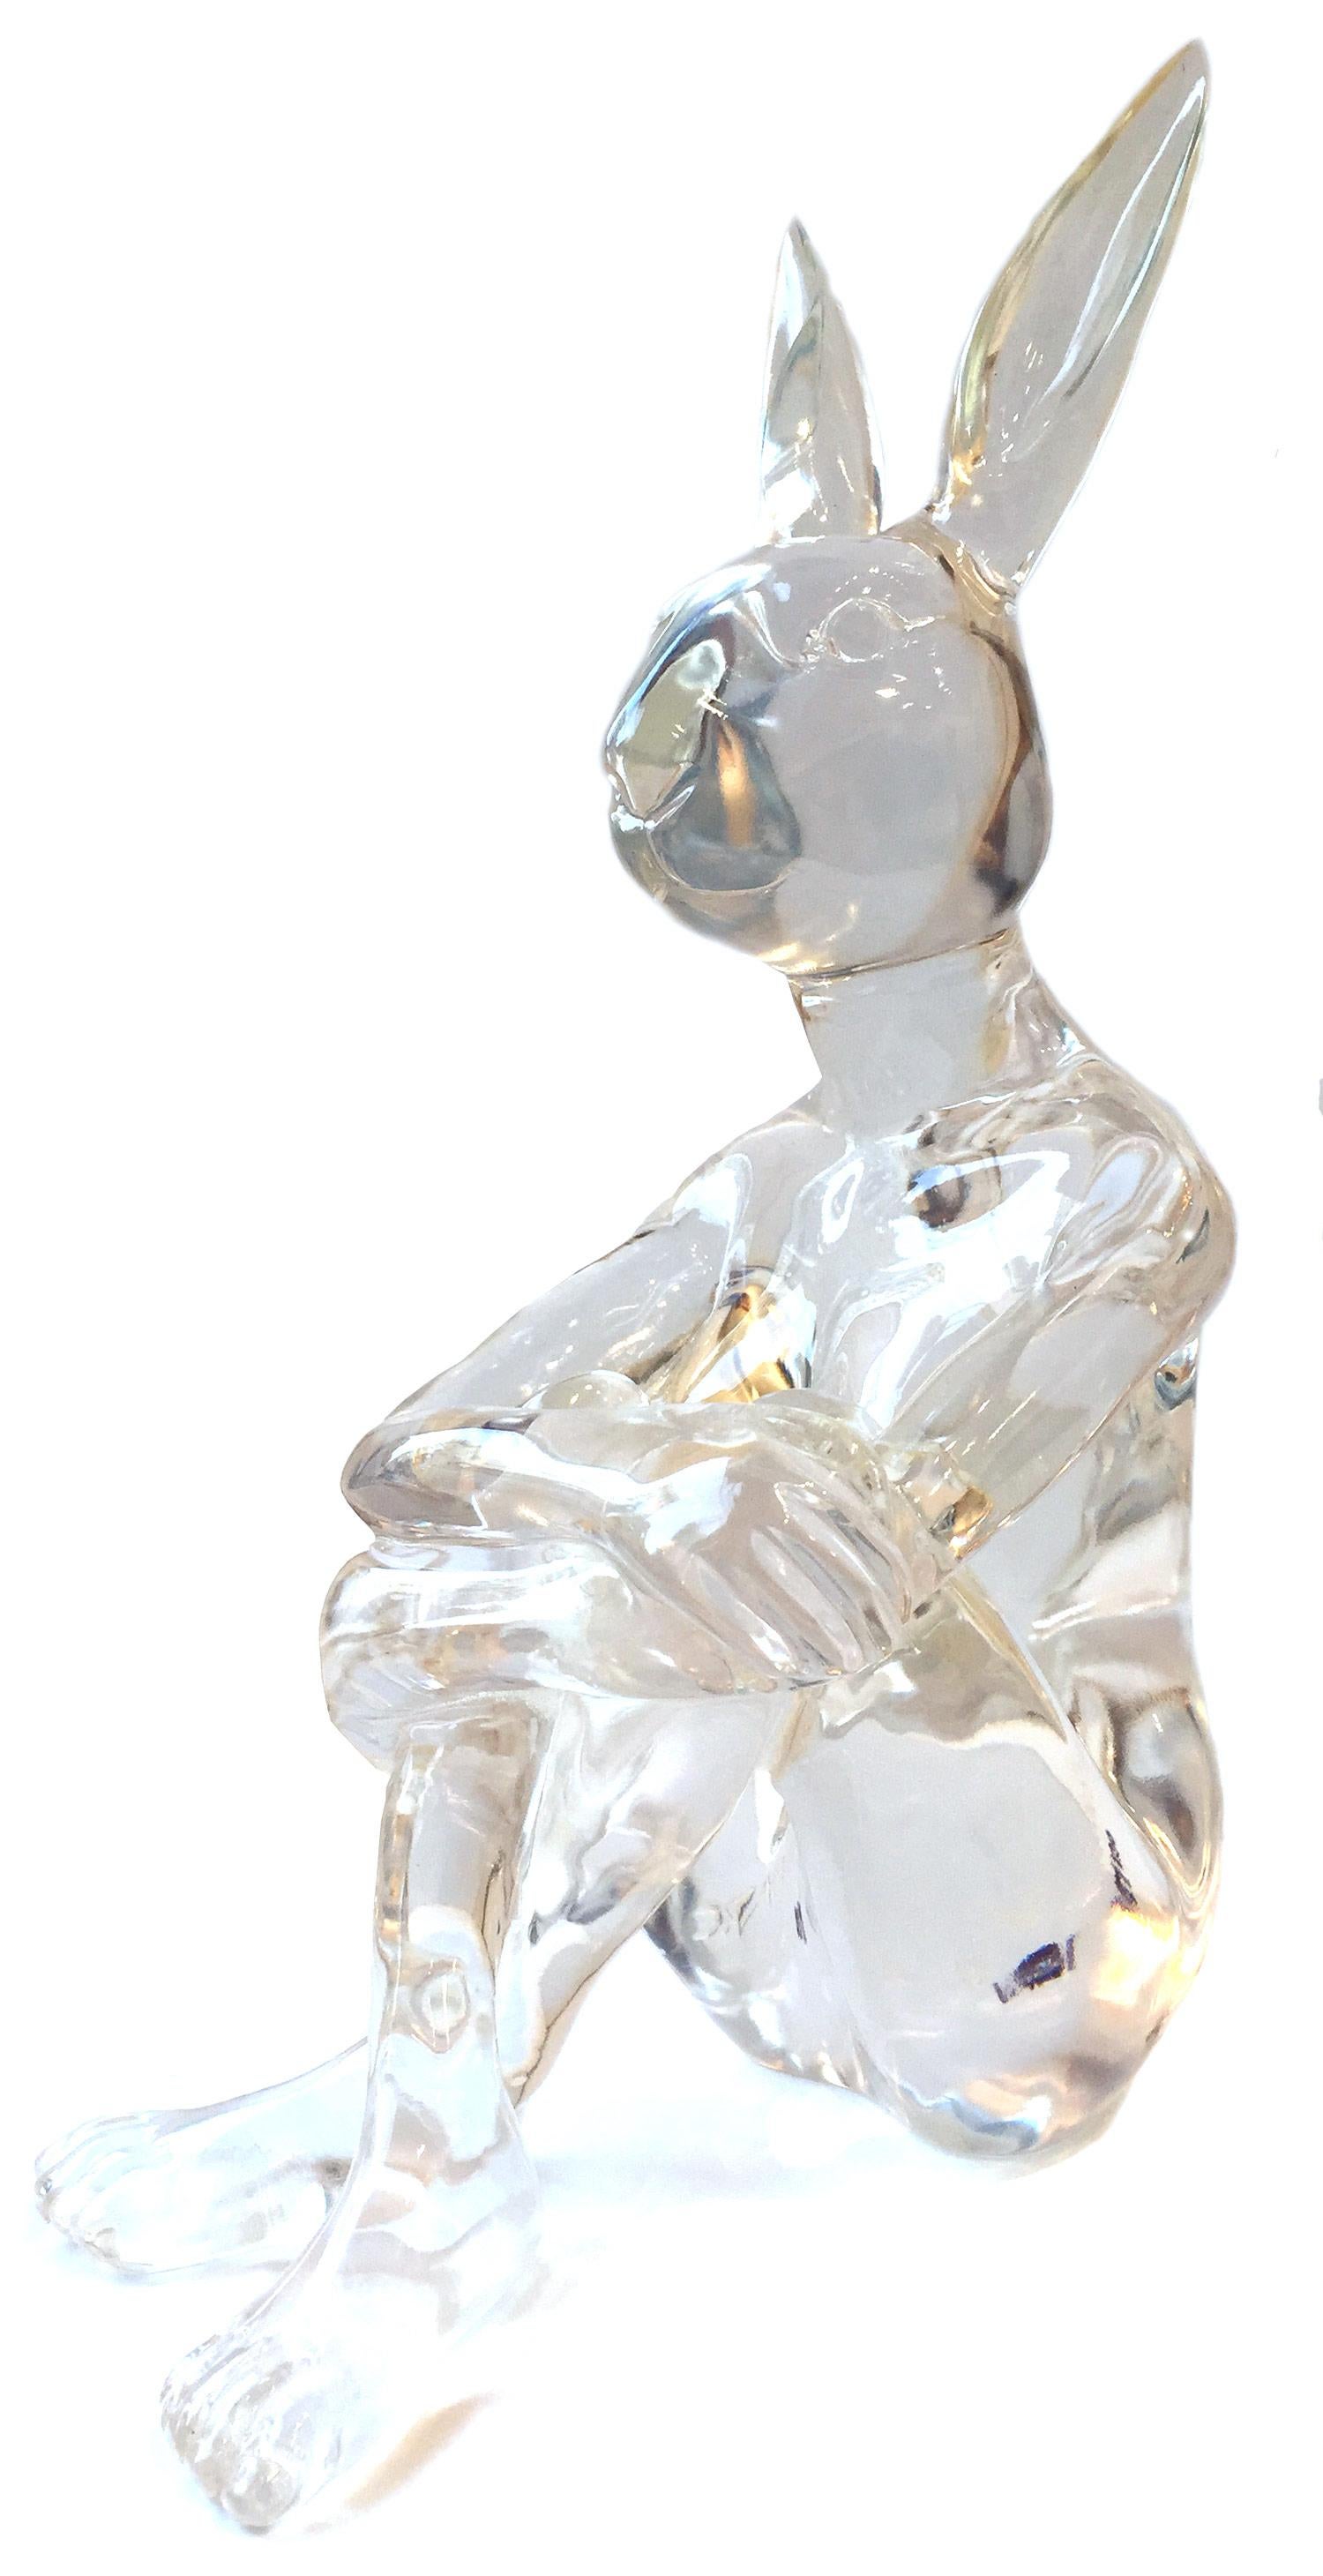 Gillie and Marc Schattner Abstract Sculpture – Lolly Kaninchenmädchen (Clear)